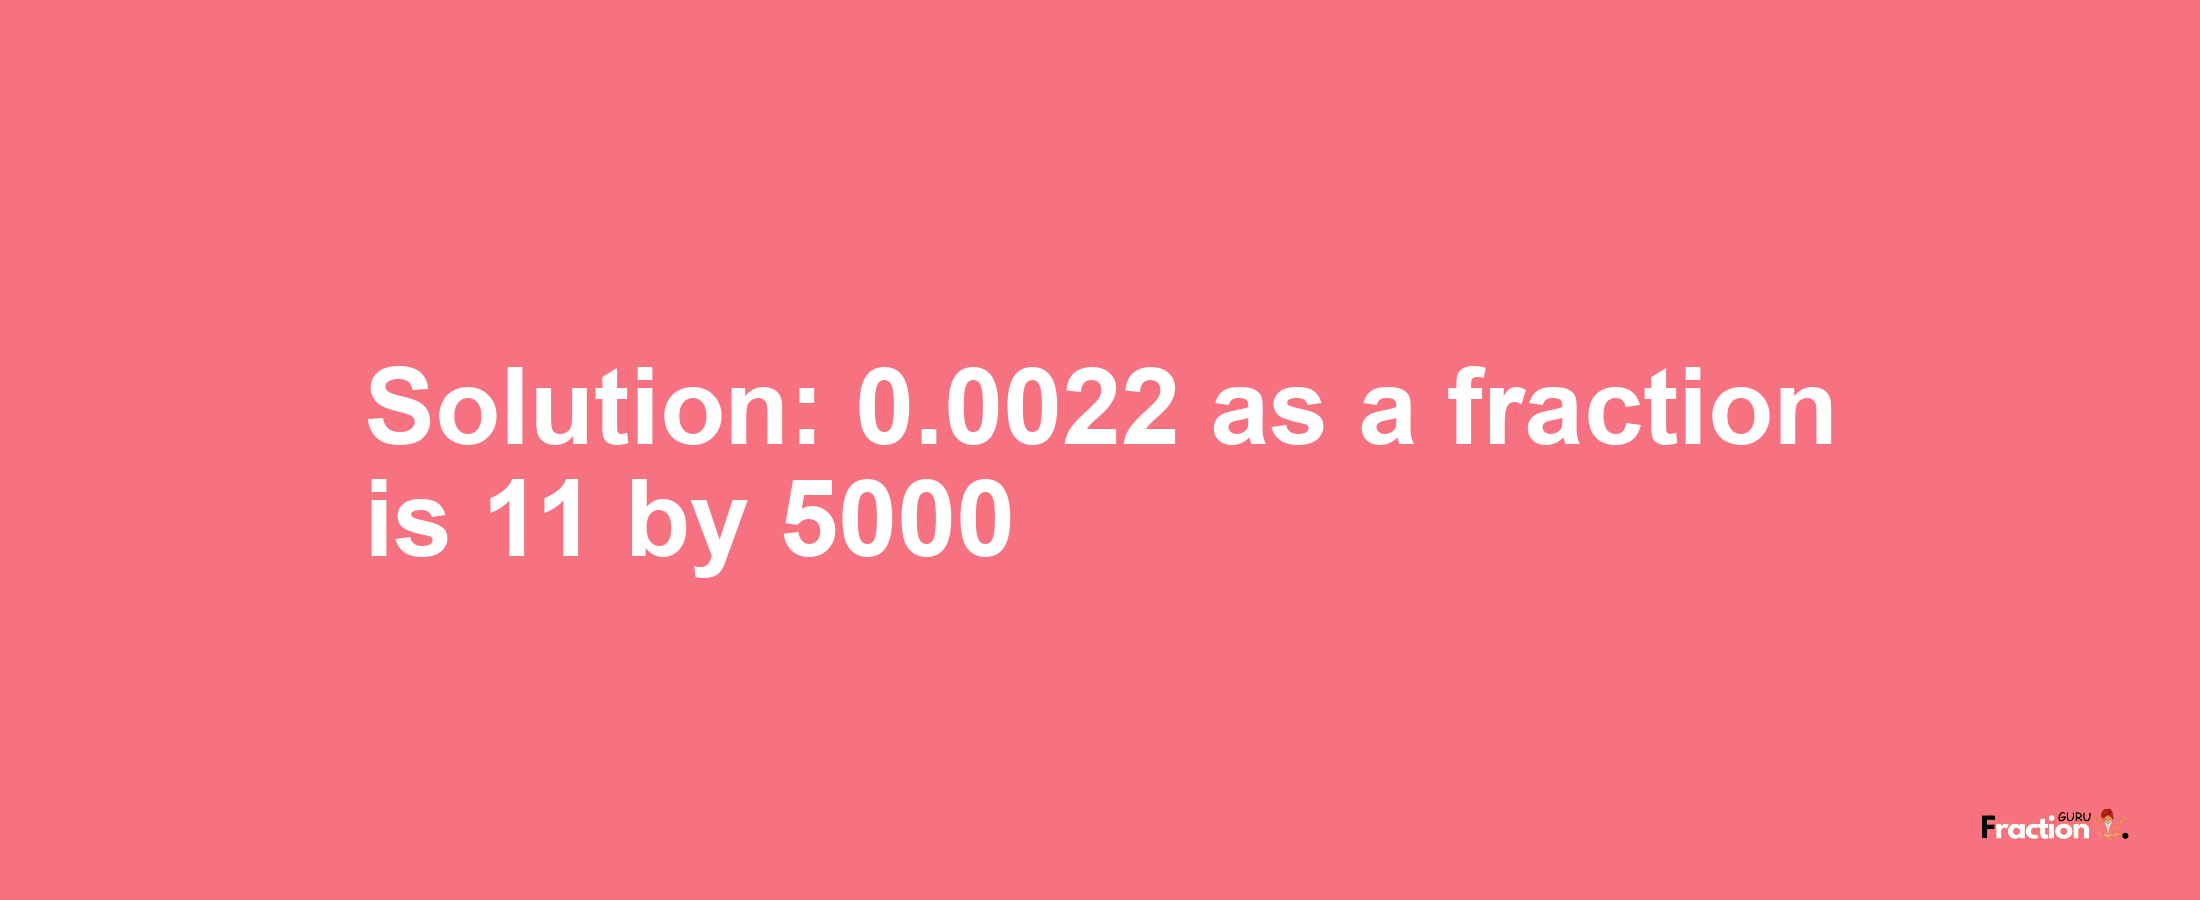 Solution:0.0022 as a fraction is 11/5000